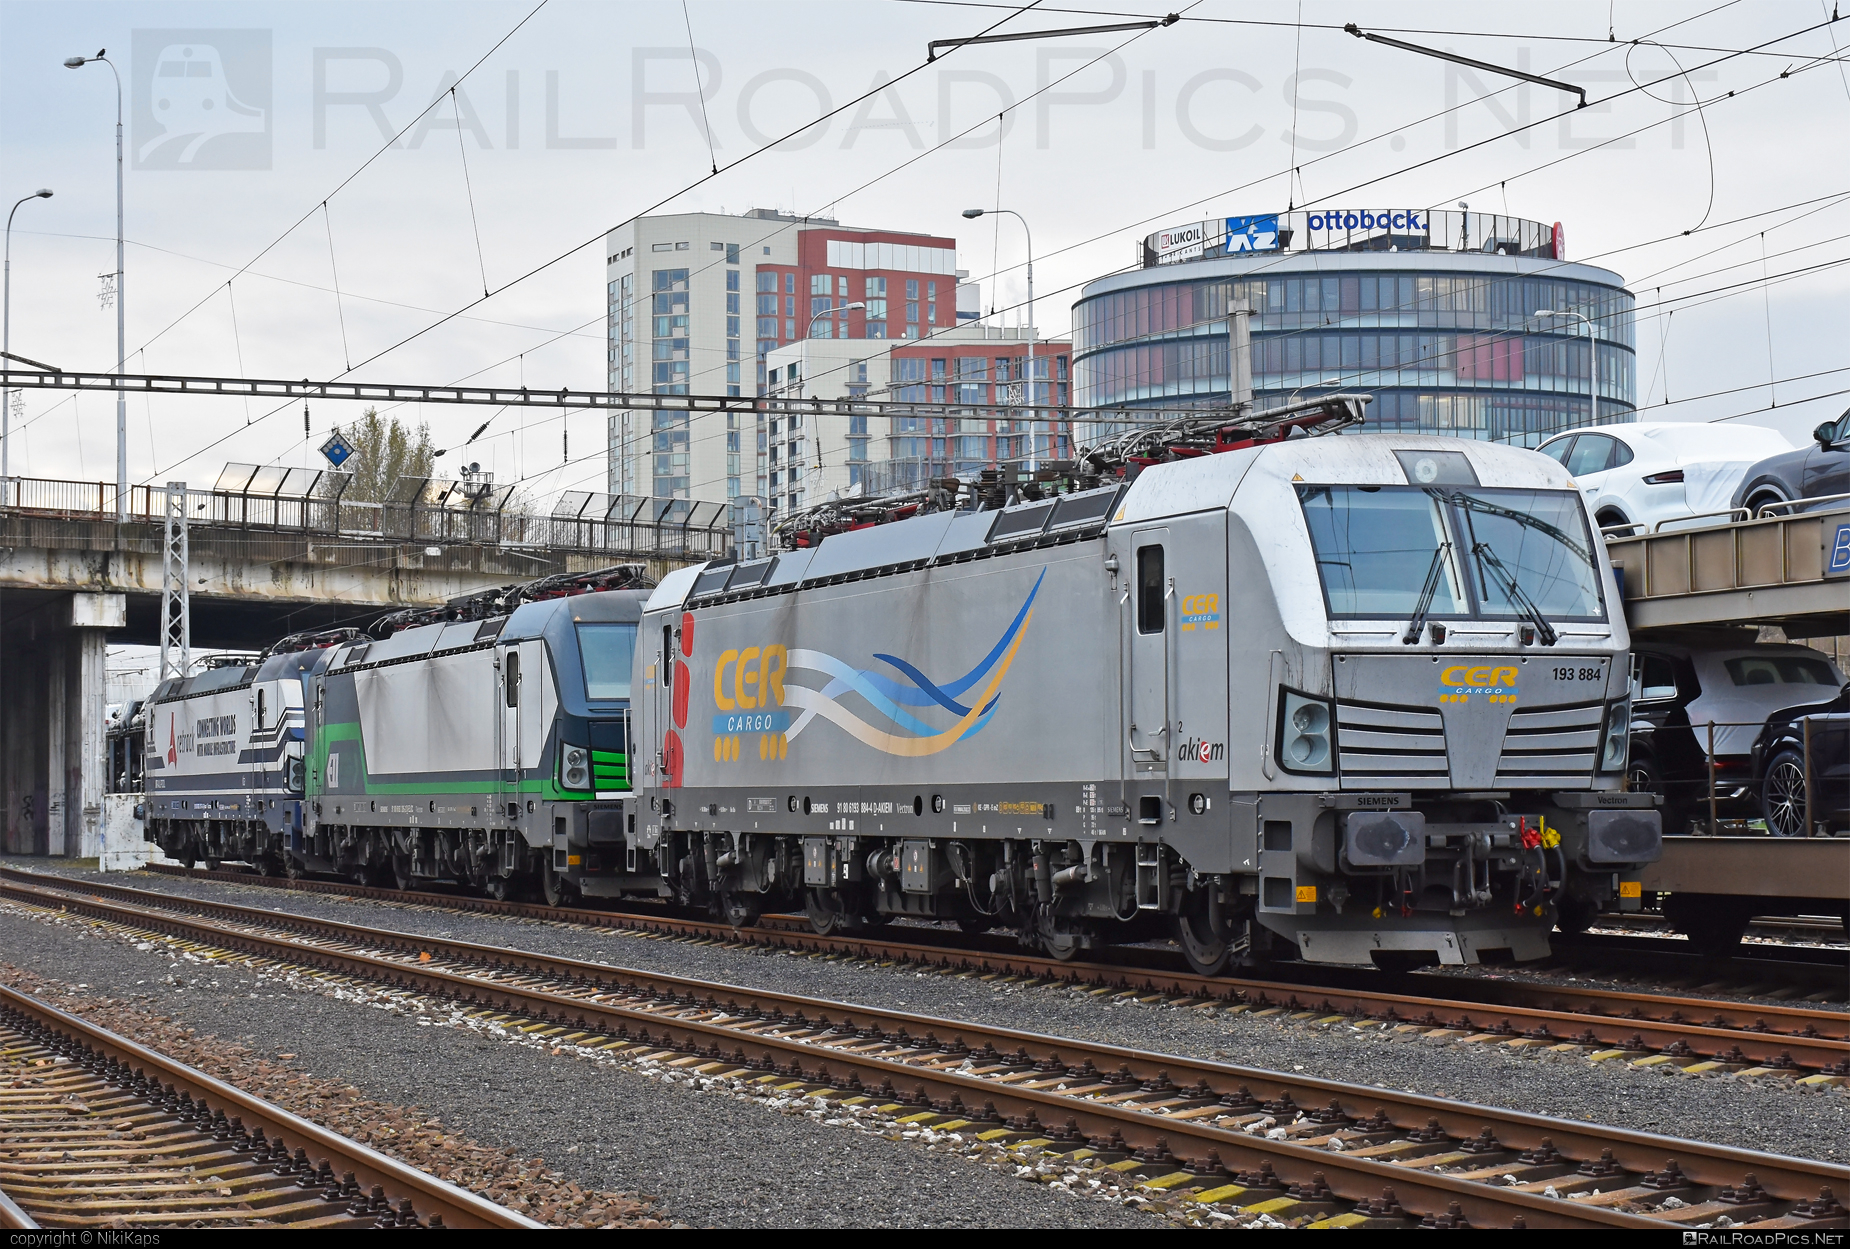 Siemens Vectron MS - 193 884 operated by CER Cargo Holding SE #akiem #akiemsas #cer #cercargoholding #cercargoholdingse #siemens #siemensVectron #siemensVectronMS #vectron #vectronMS